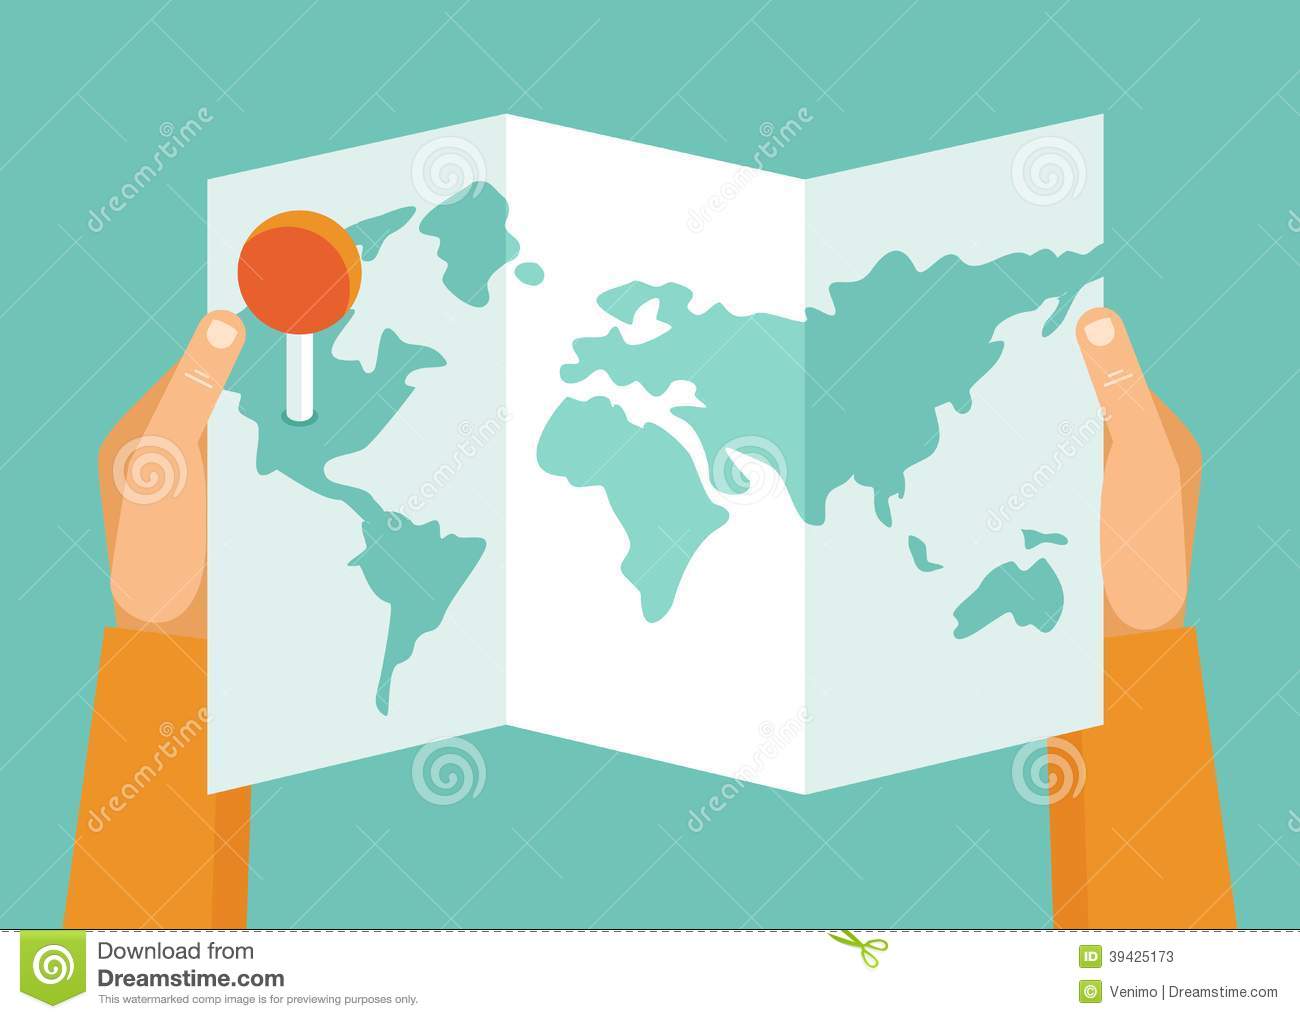 Plan Concept   Hands Holding World Map   Illustration In Flat Style